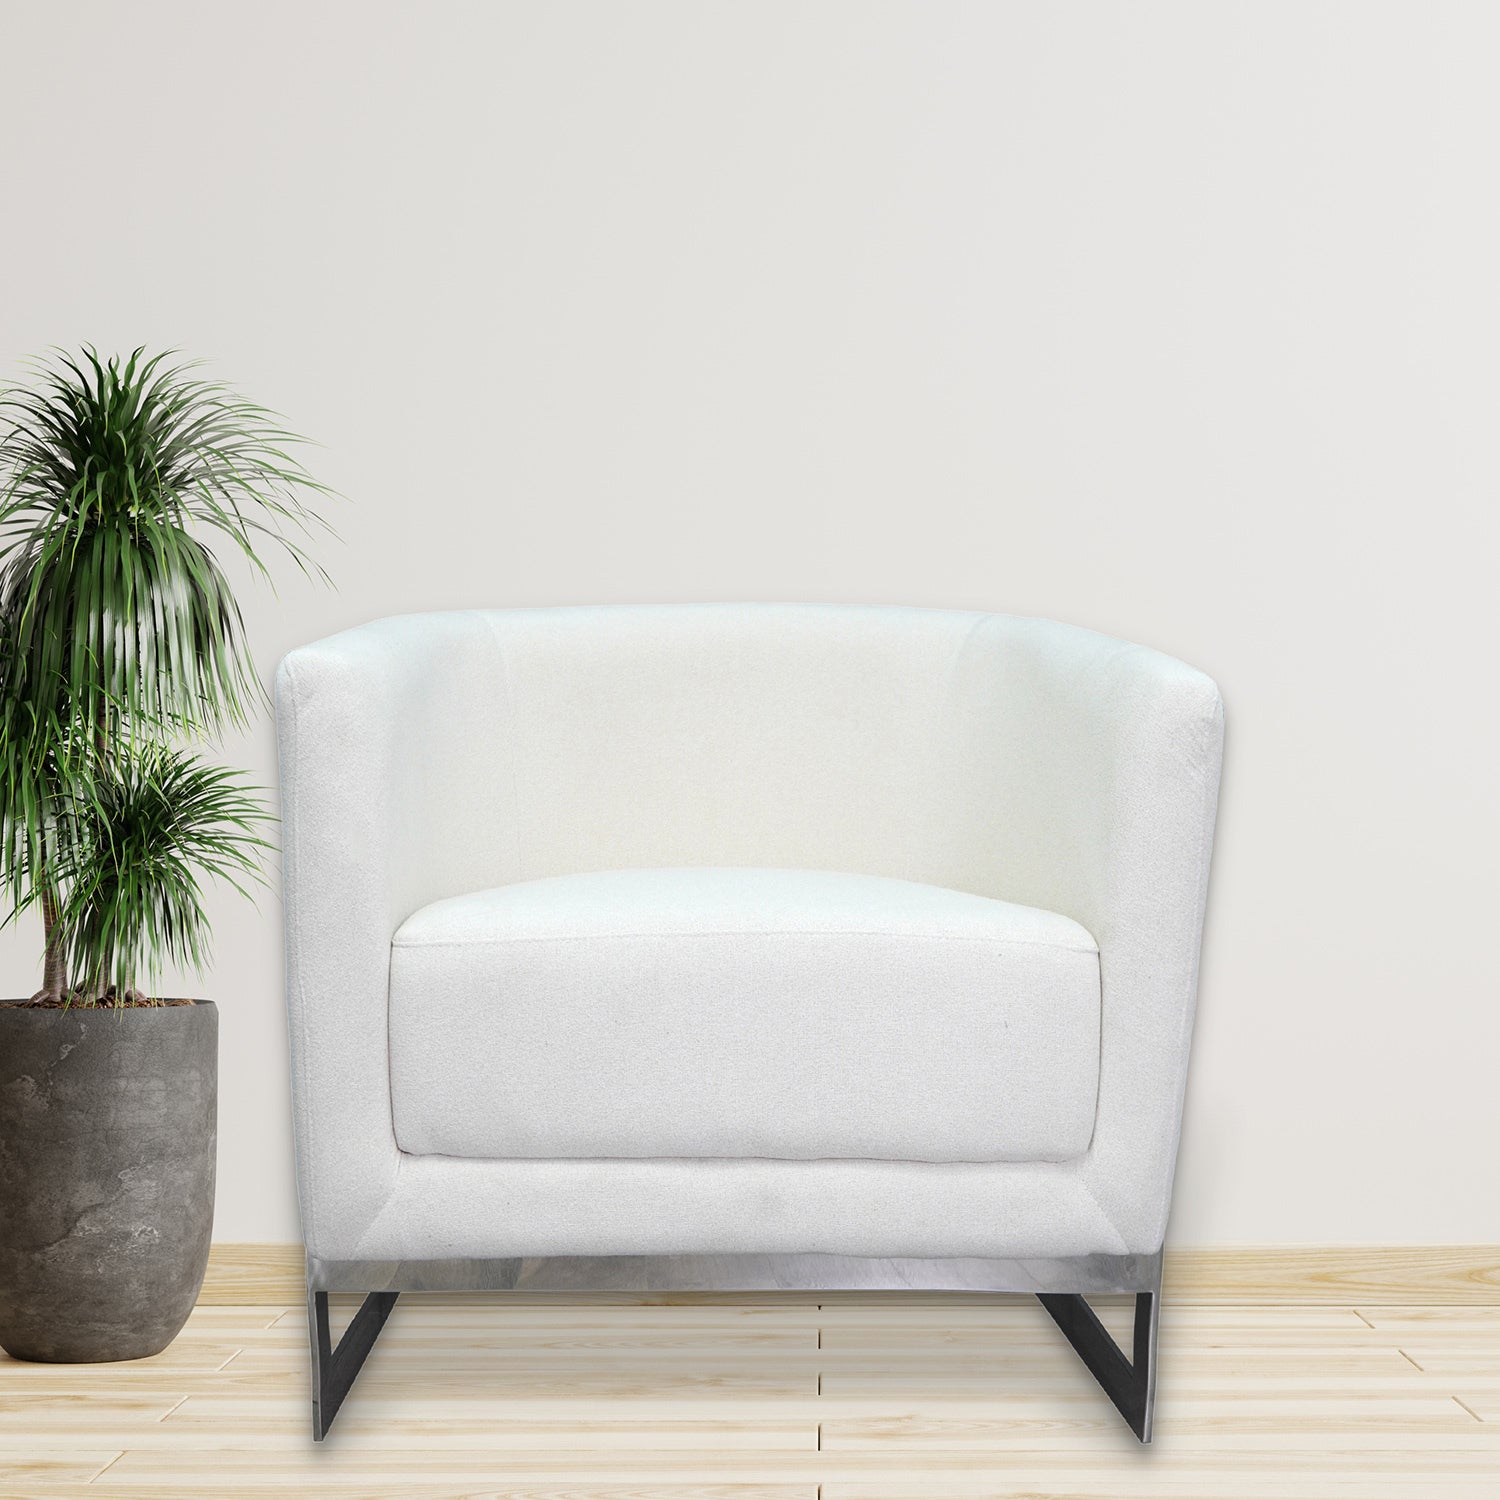 White and Silver Sofa Chair